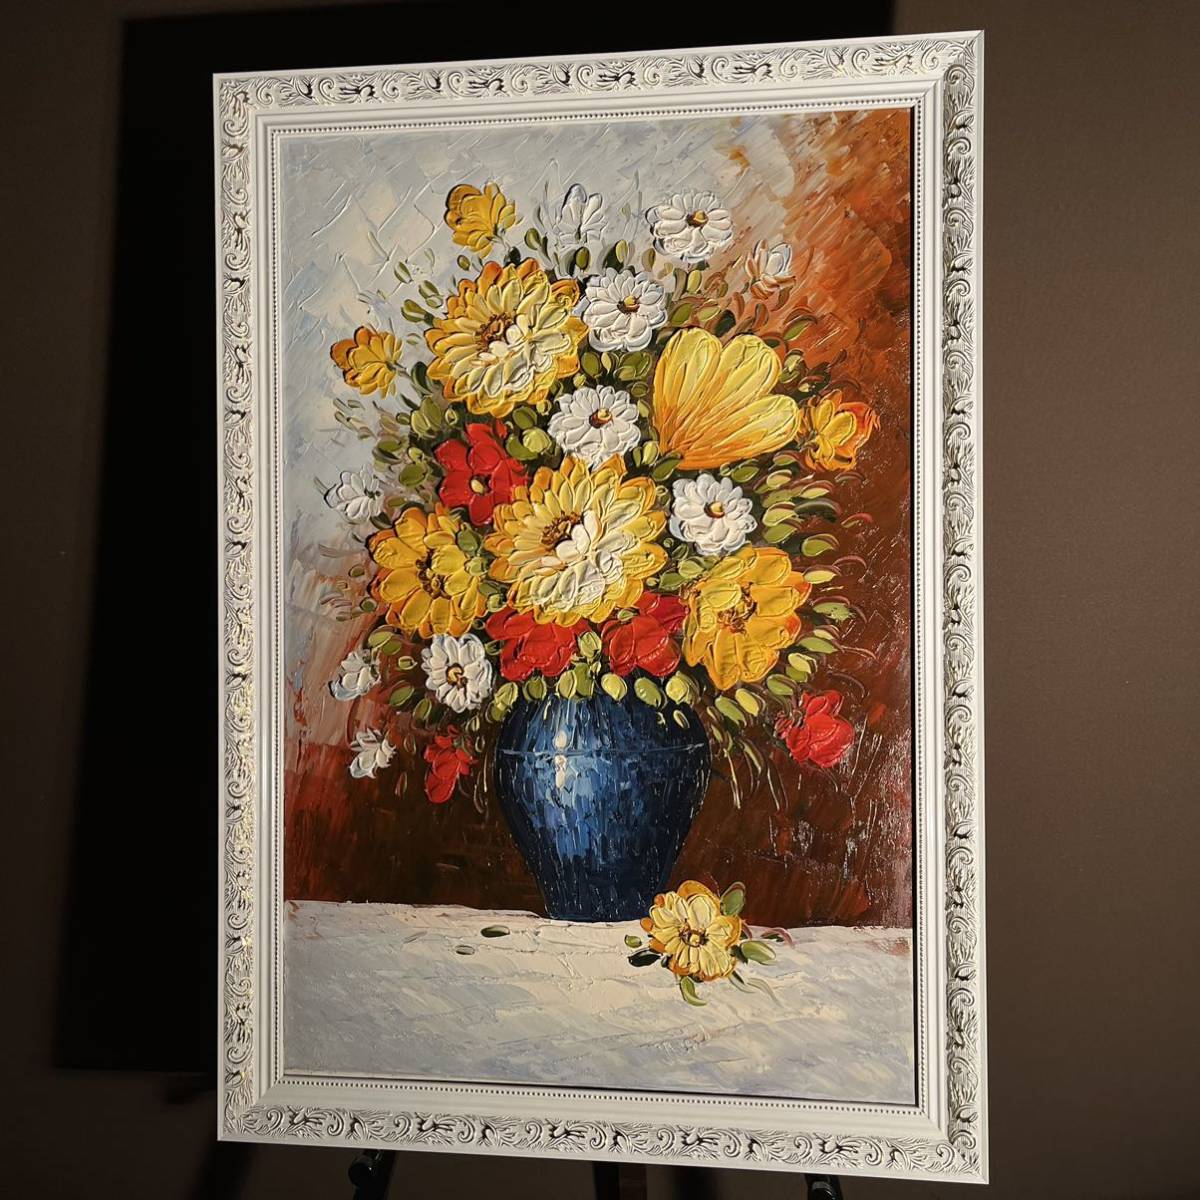 * preeminence work * handwriting . oil painting vase. flower ( large ) amount attaching picture interior oil painting .